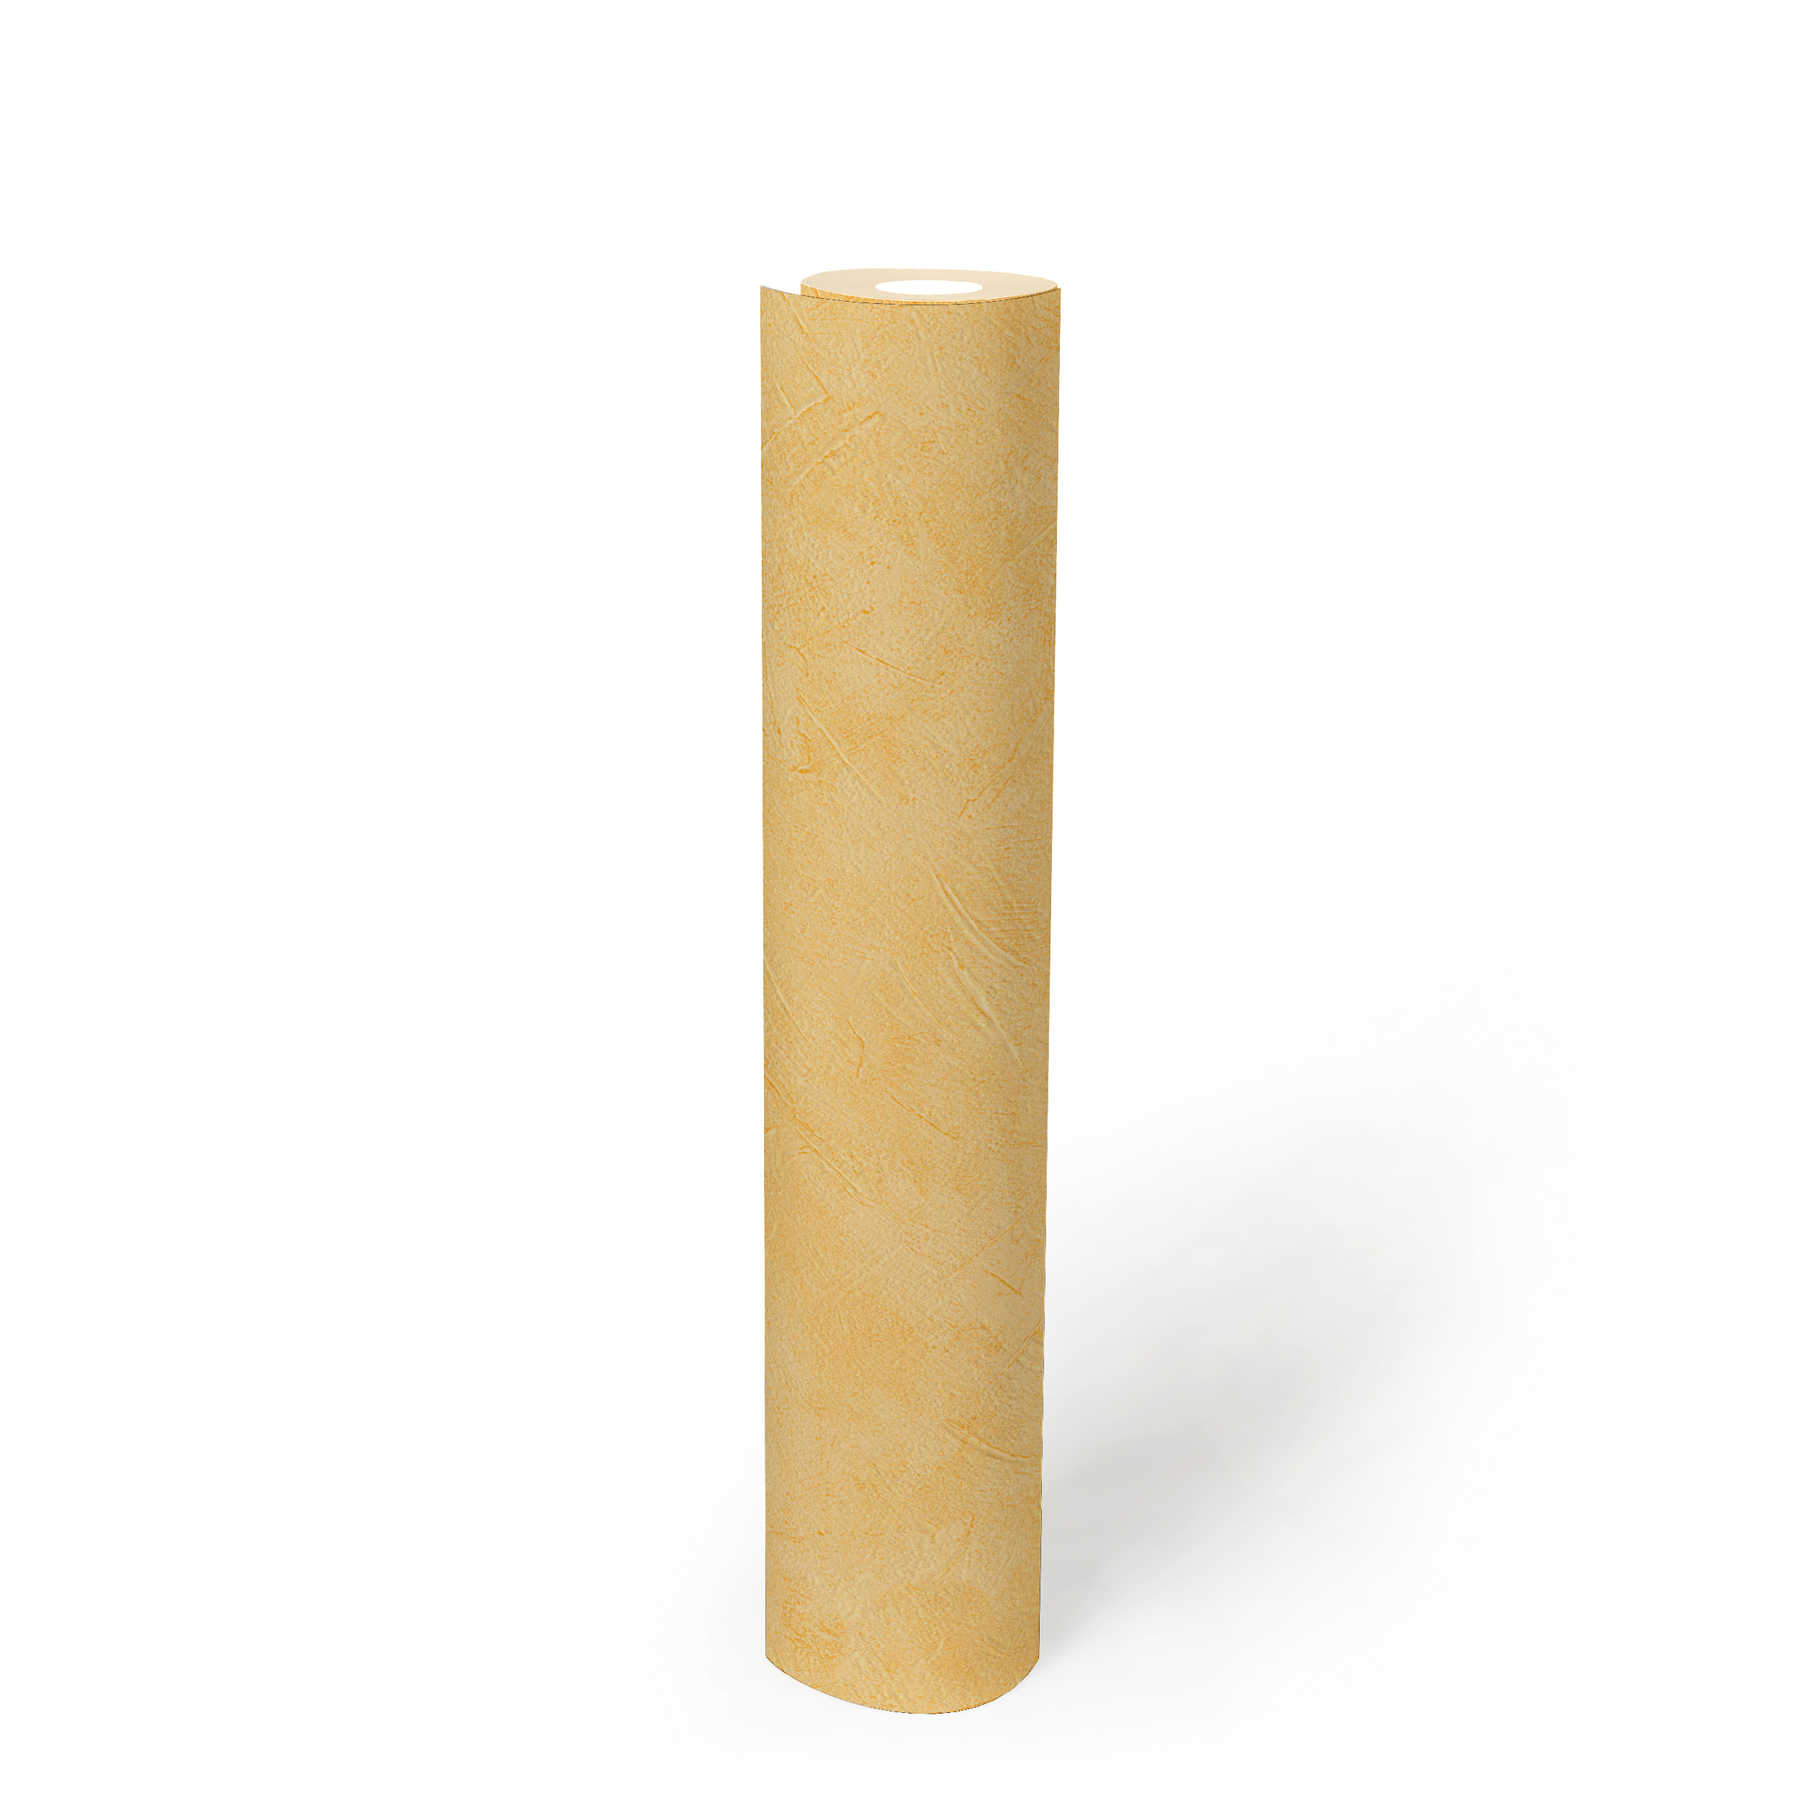             Plaster wallpaper wiping plaster yellow uni with structure pattern
        